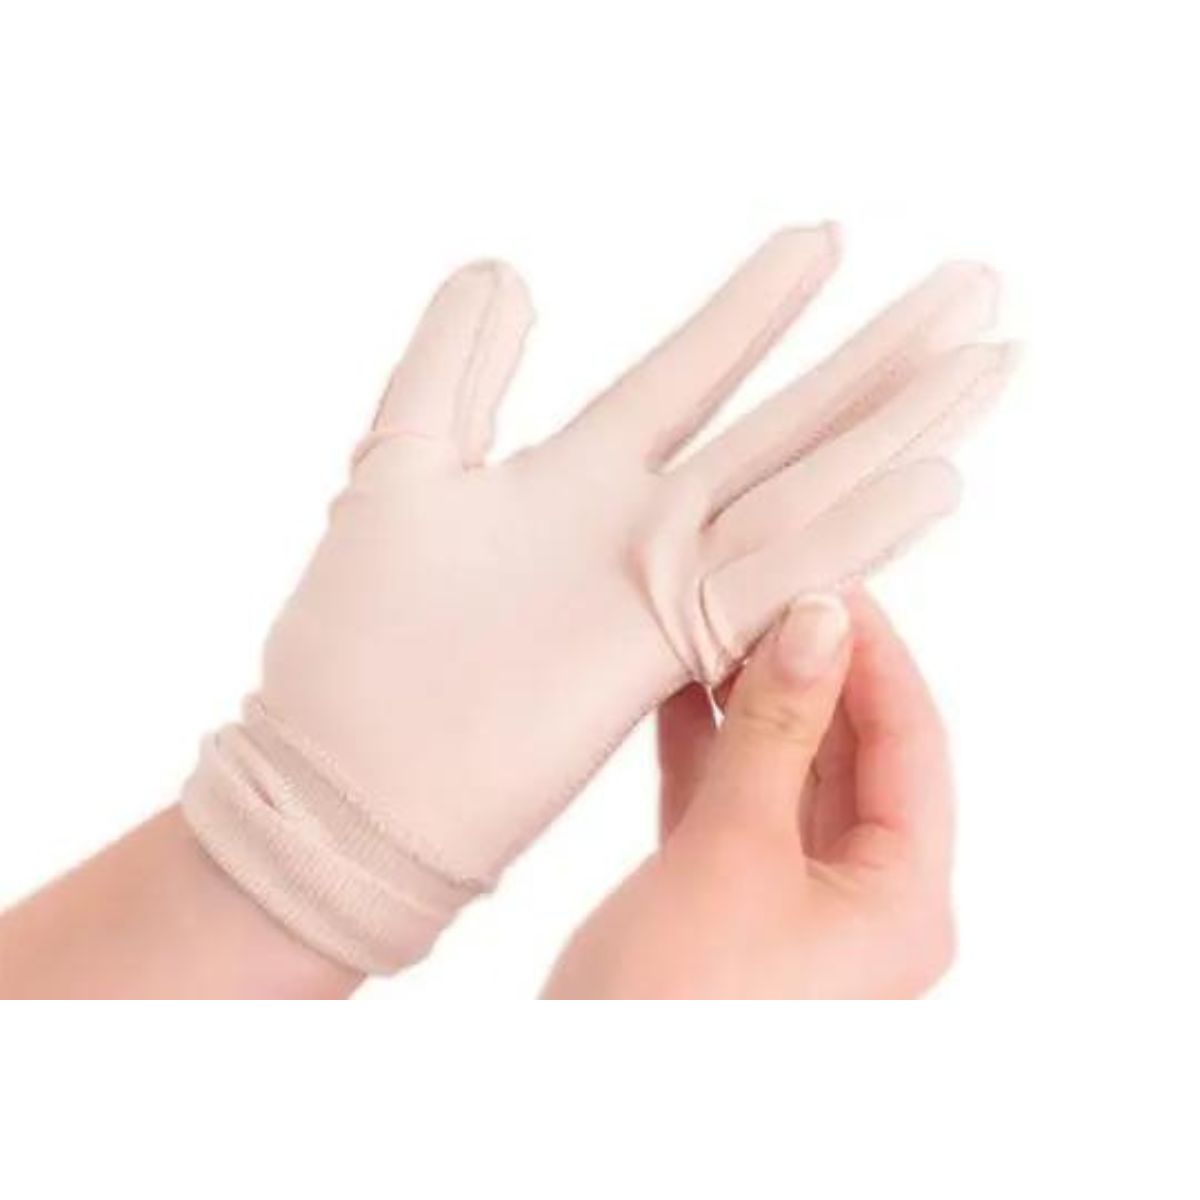 Gloves for scars caused by burns, injuries, and surgeries